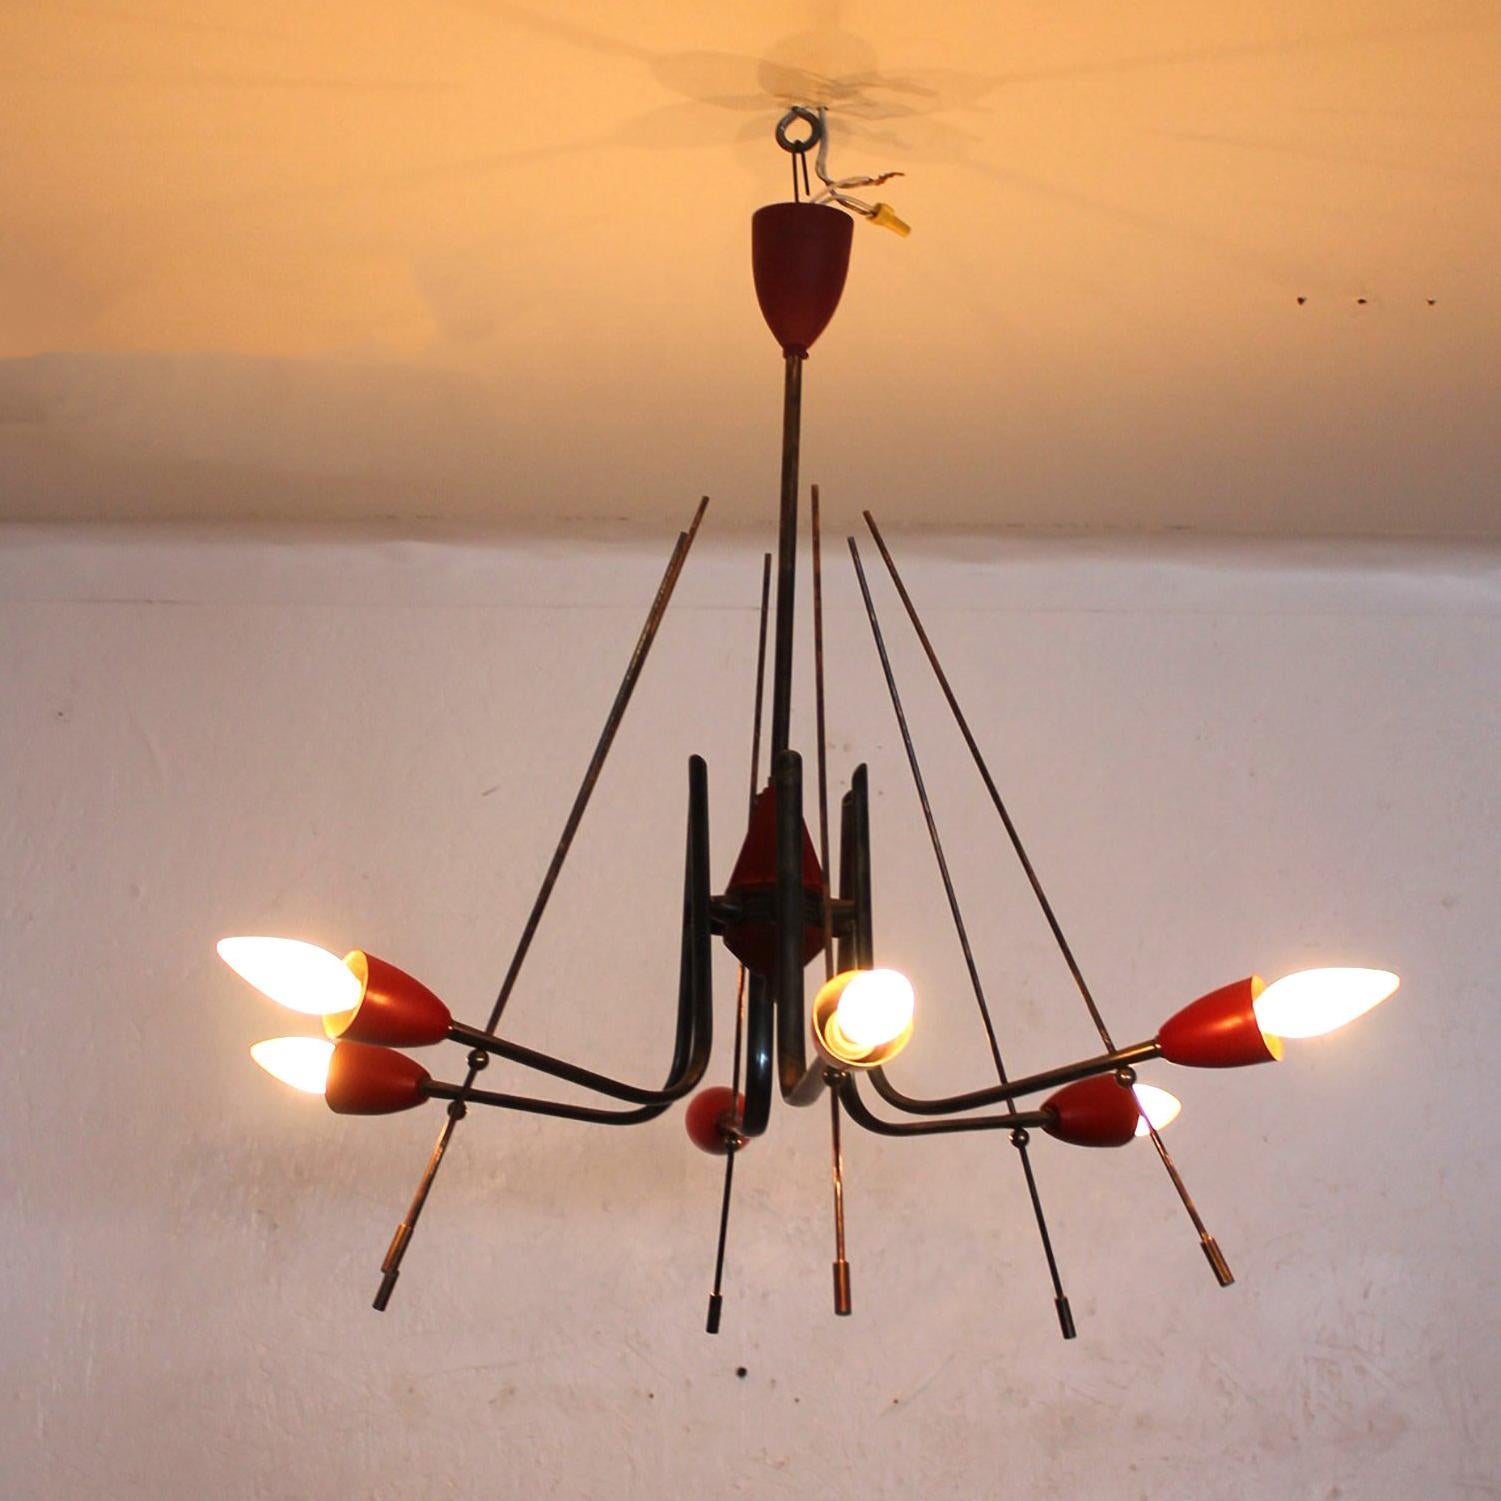 For your consideration a vintage modern Italian chandelier.
Constructed with solid brass and aluminum shades painted in red color.

Rewired and ready to go. It will require six (6) e-14 bulbs. Bulbs not included.
The E-14 comes in different shapes